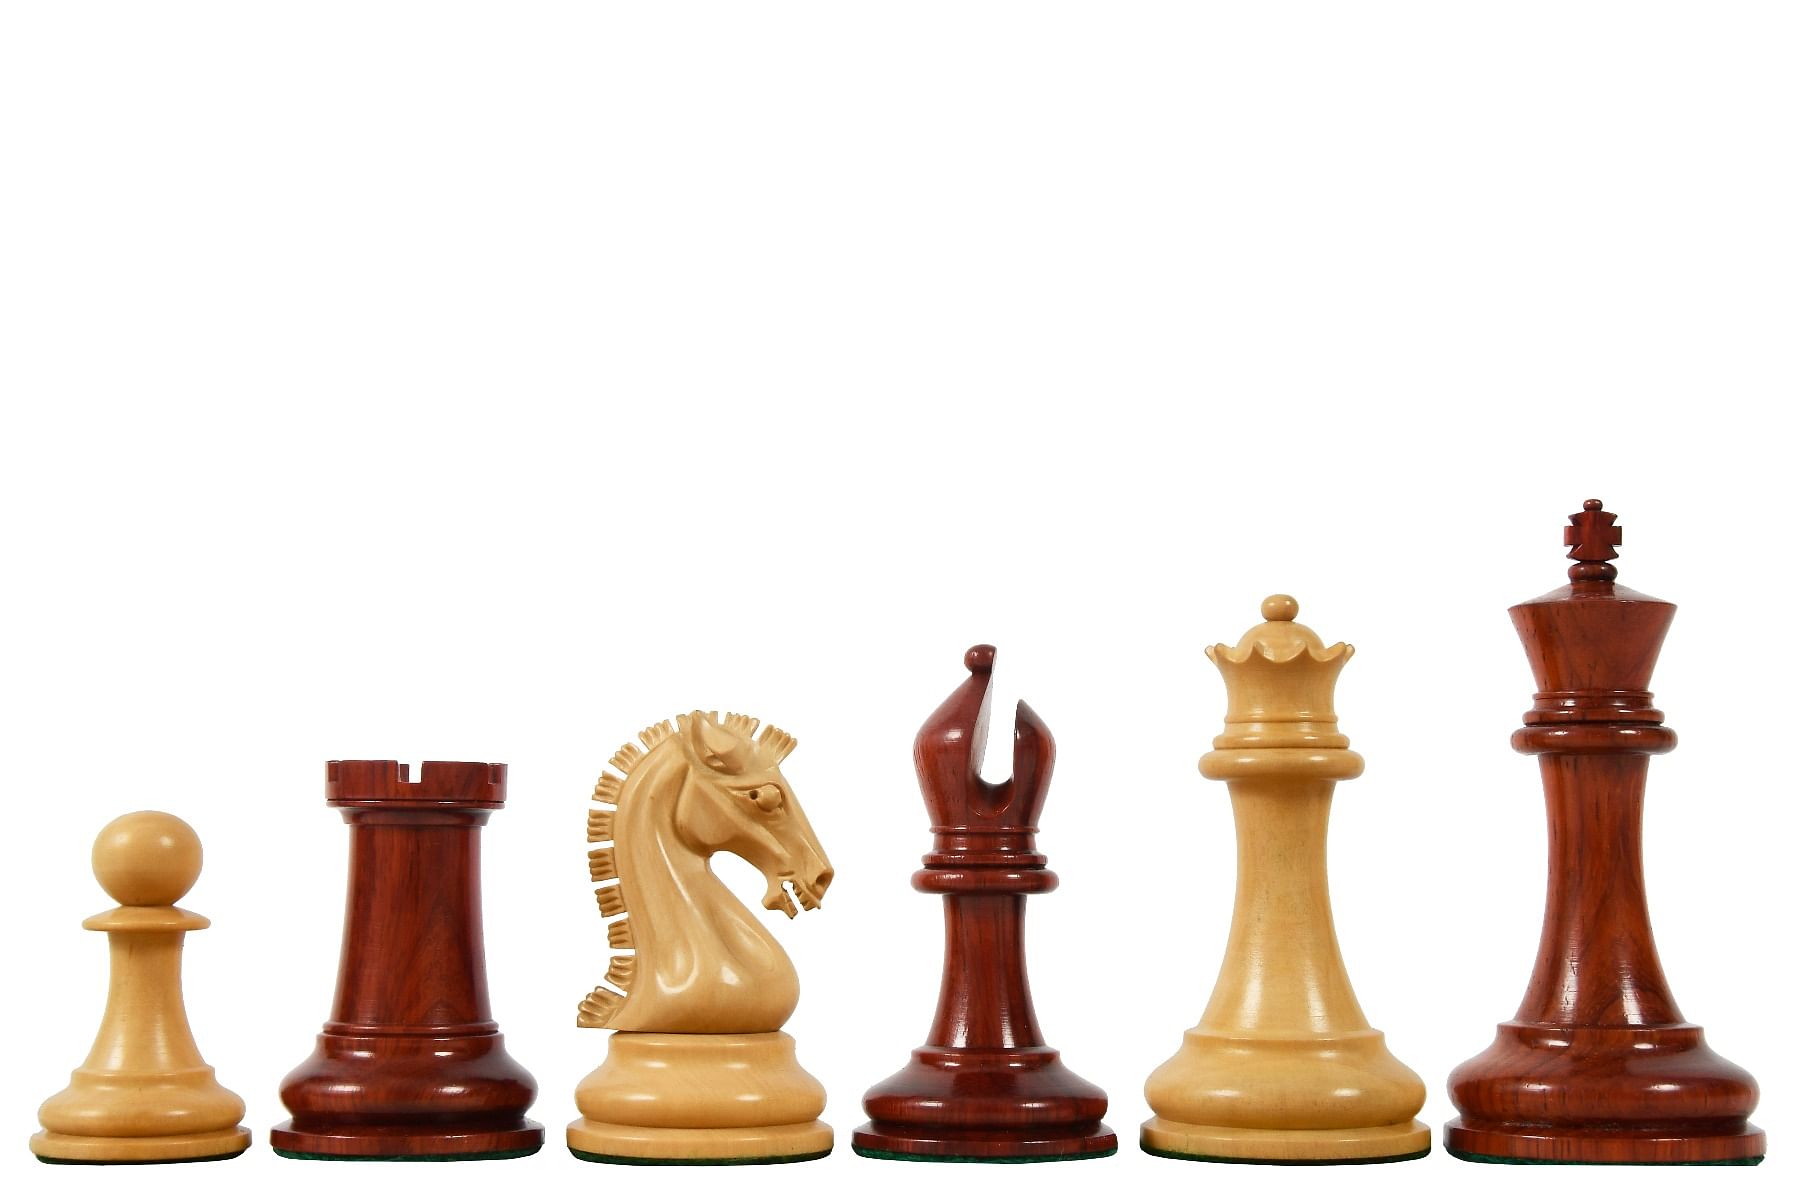 The Sinquefield Cup 2017 Reproduced Original Chess Pieces in Bud Rosewood & Boxwood - 3.75